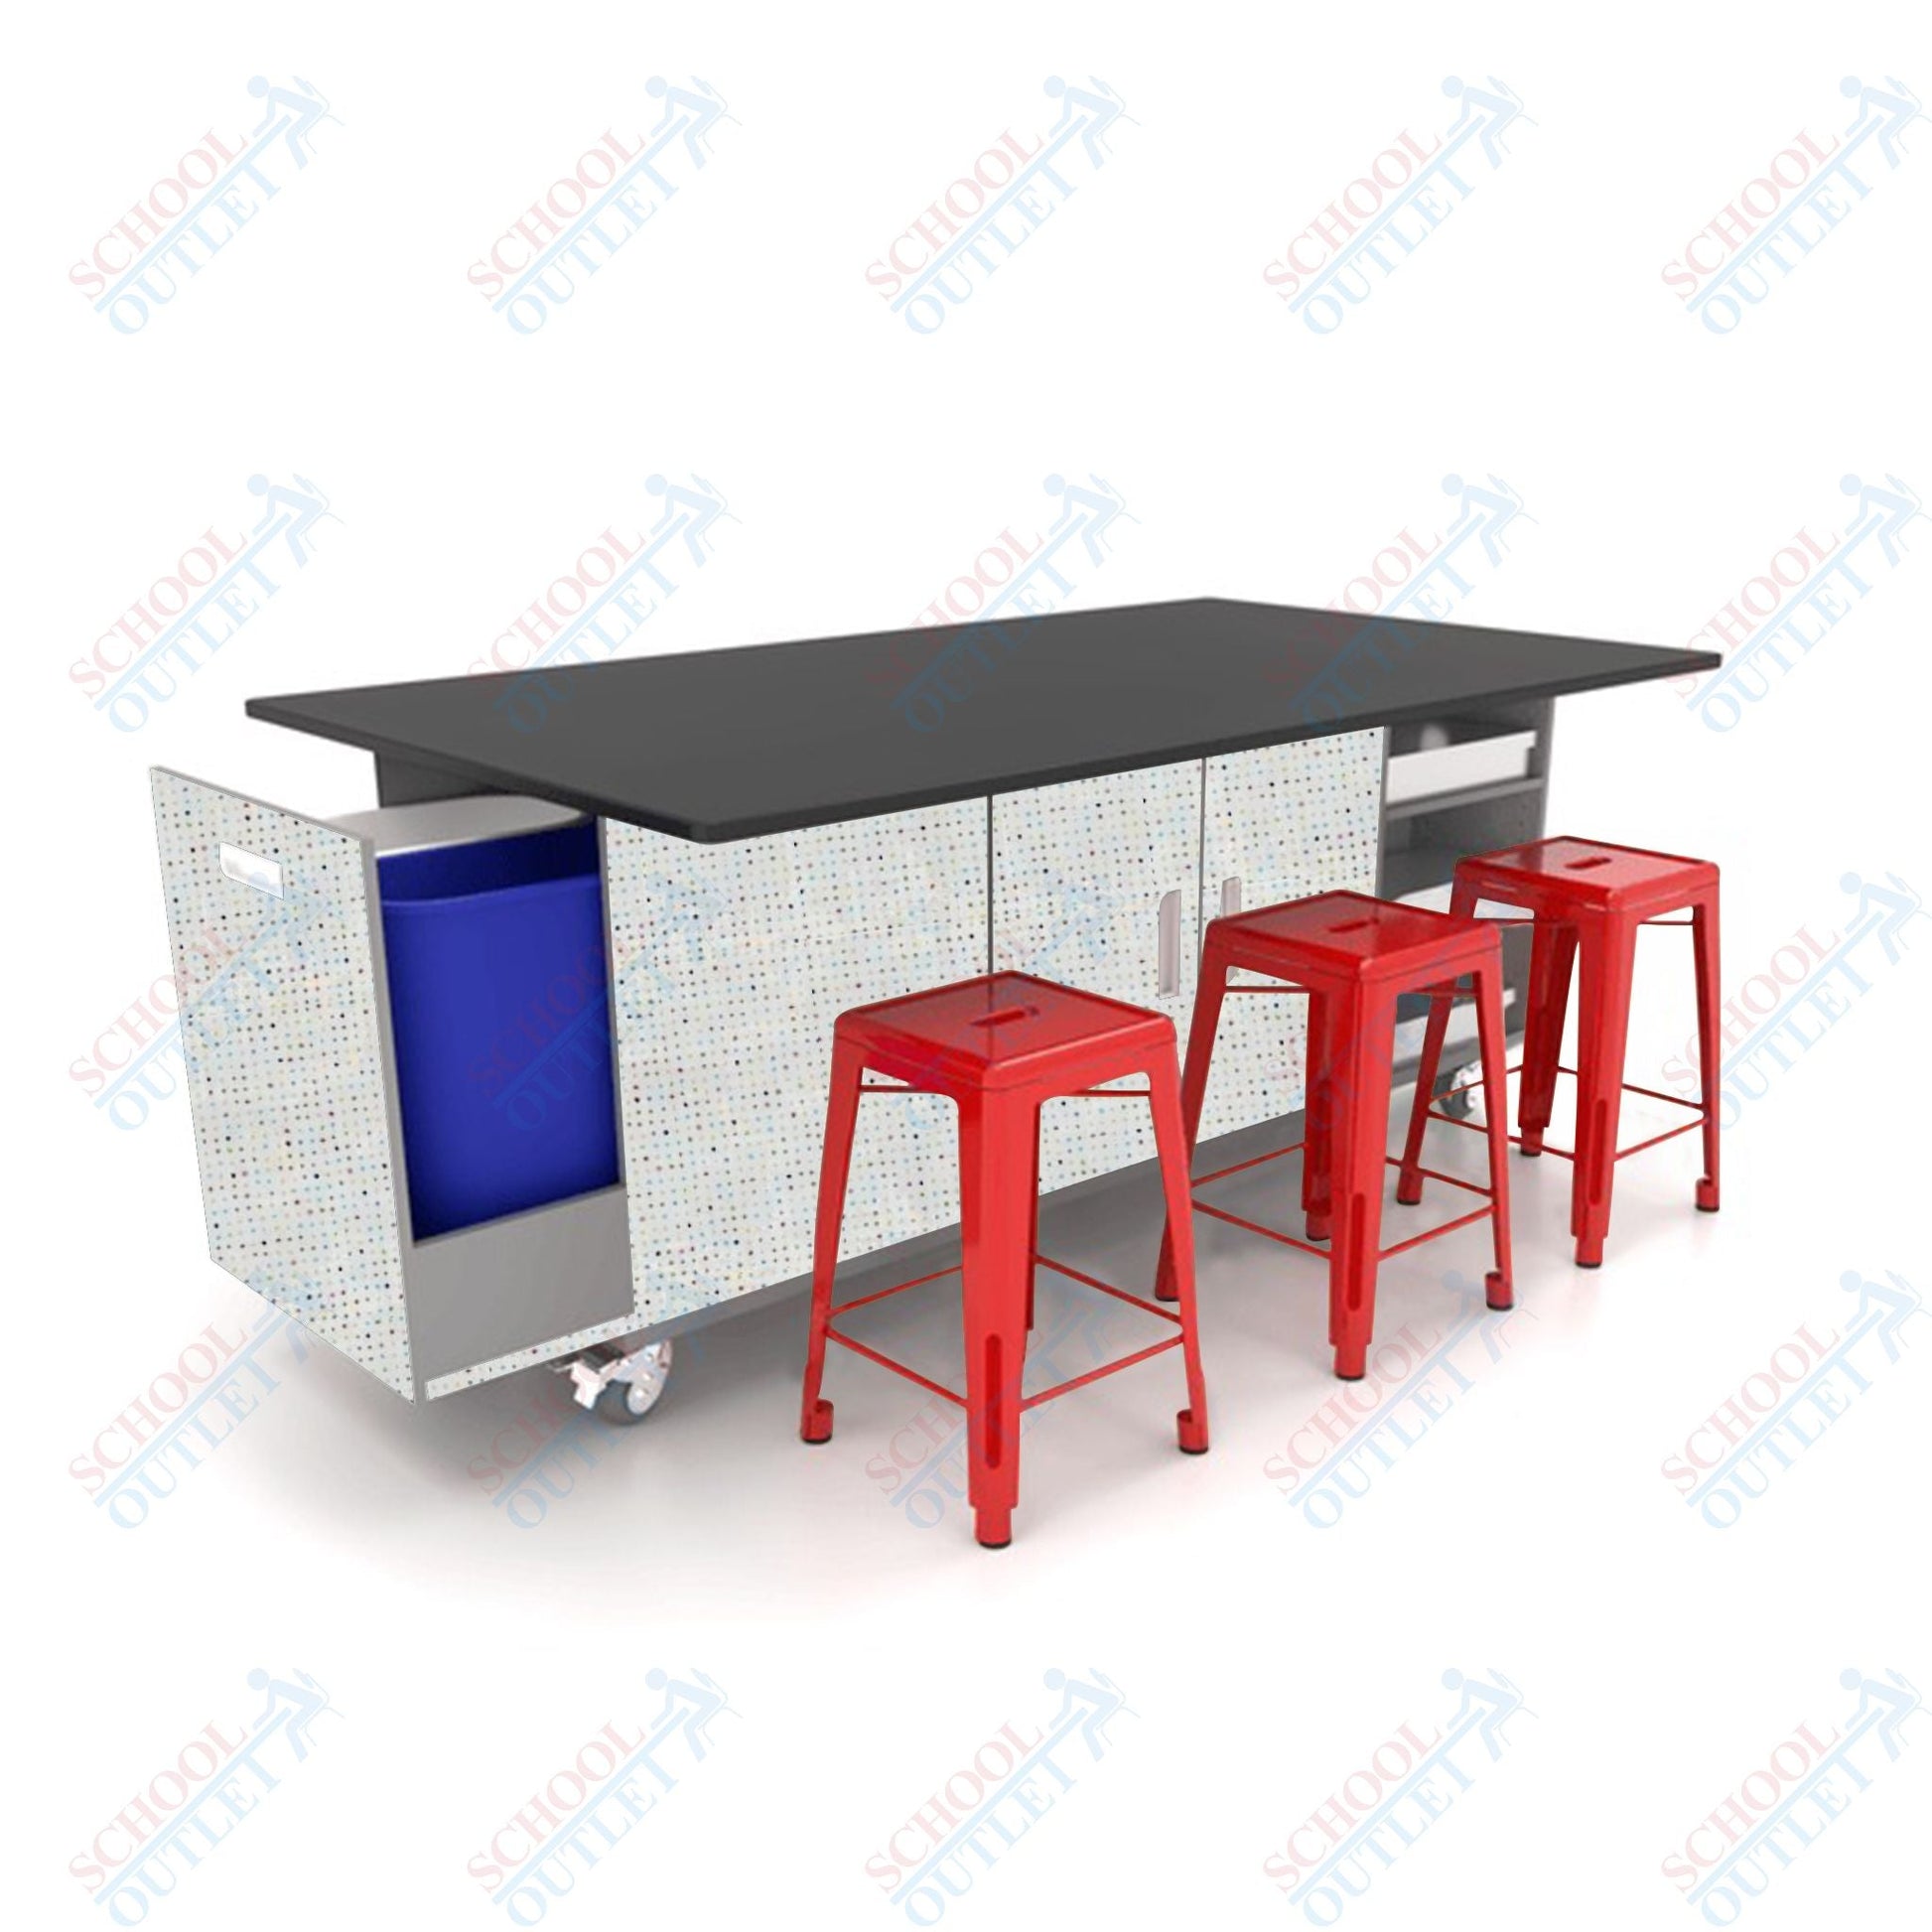 CEF ED Original Table 42"H Chemical Resistant Top, Laminate Base with 6 Stools, Storage Bins, Trash Bins, and Electrical Outlets Included. - SchoolOutlet